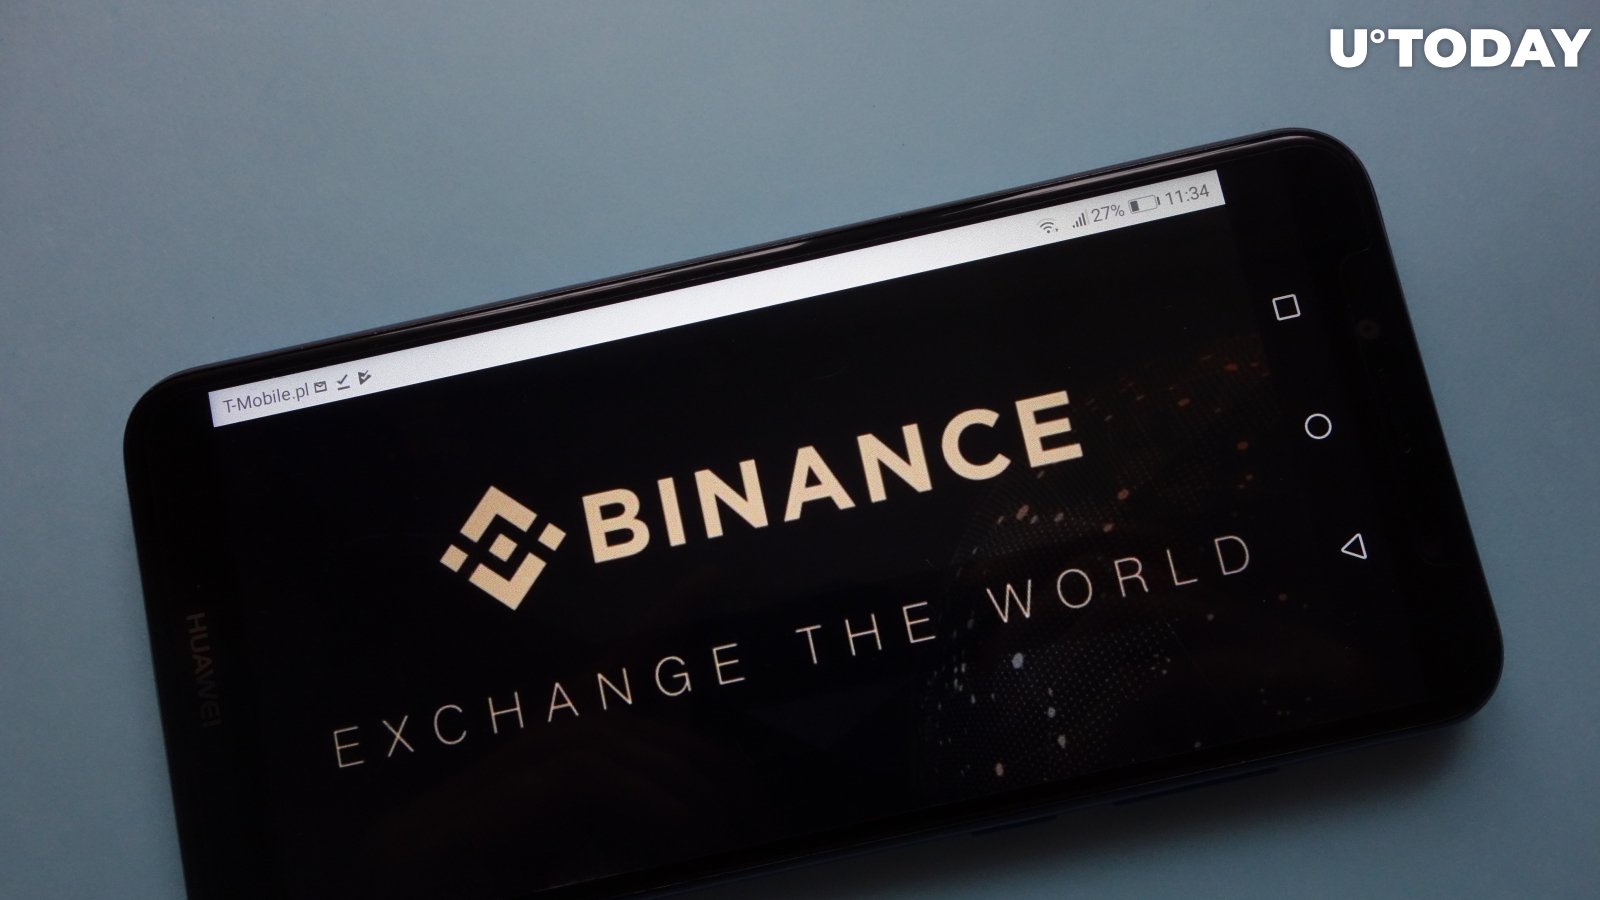 Binance CEO Says Financial Institutions Are Coming "Big Time"